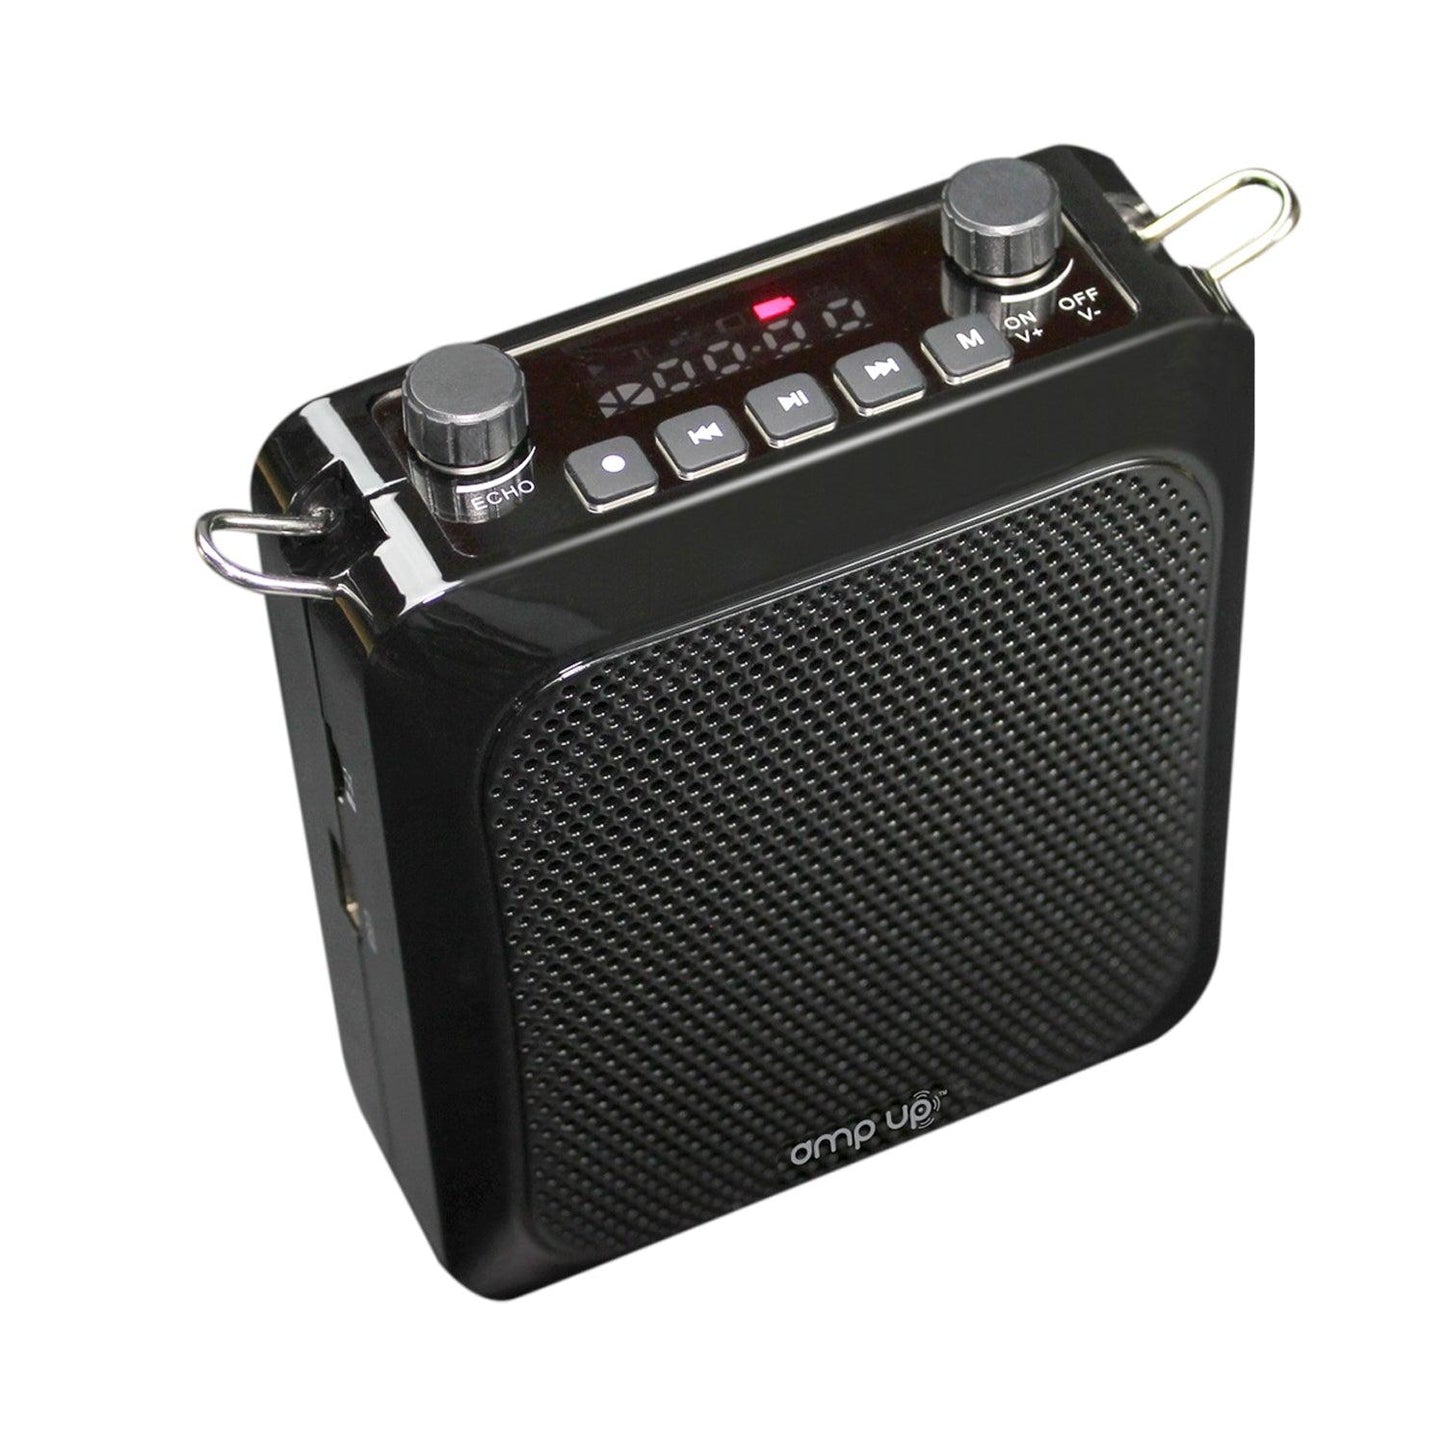 Amp-Up™ Personal UHF Voice Amplifier with Wireless Microphone – up to 40 Channels without Interference! - Loomini